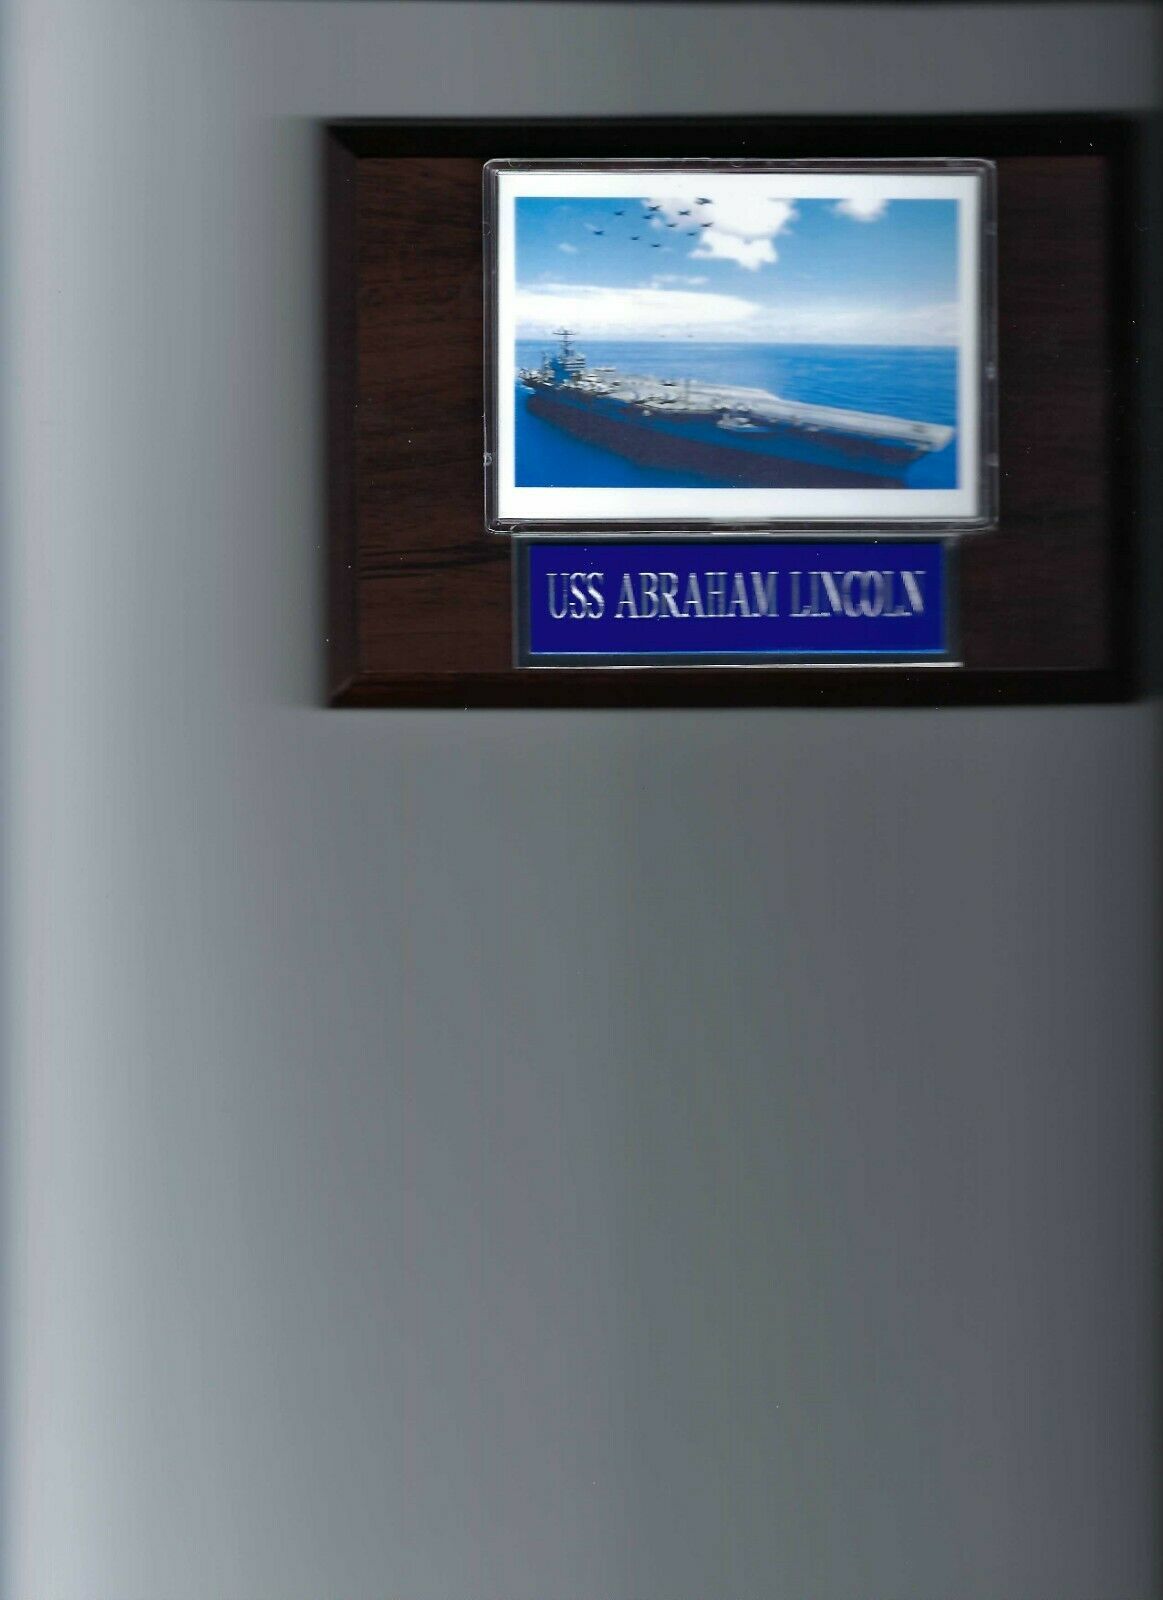 Primary image for USS ABRAHAM LINCOLN PLAQUE NAVY US USA MILITARY CVN-72 SHIP AIRCRAFT CARRIER